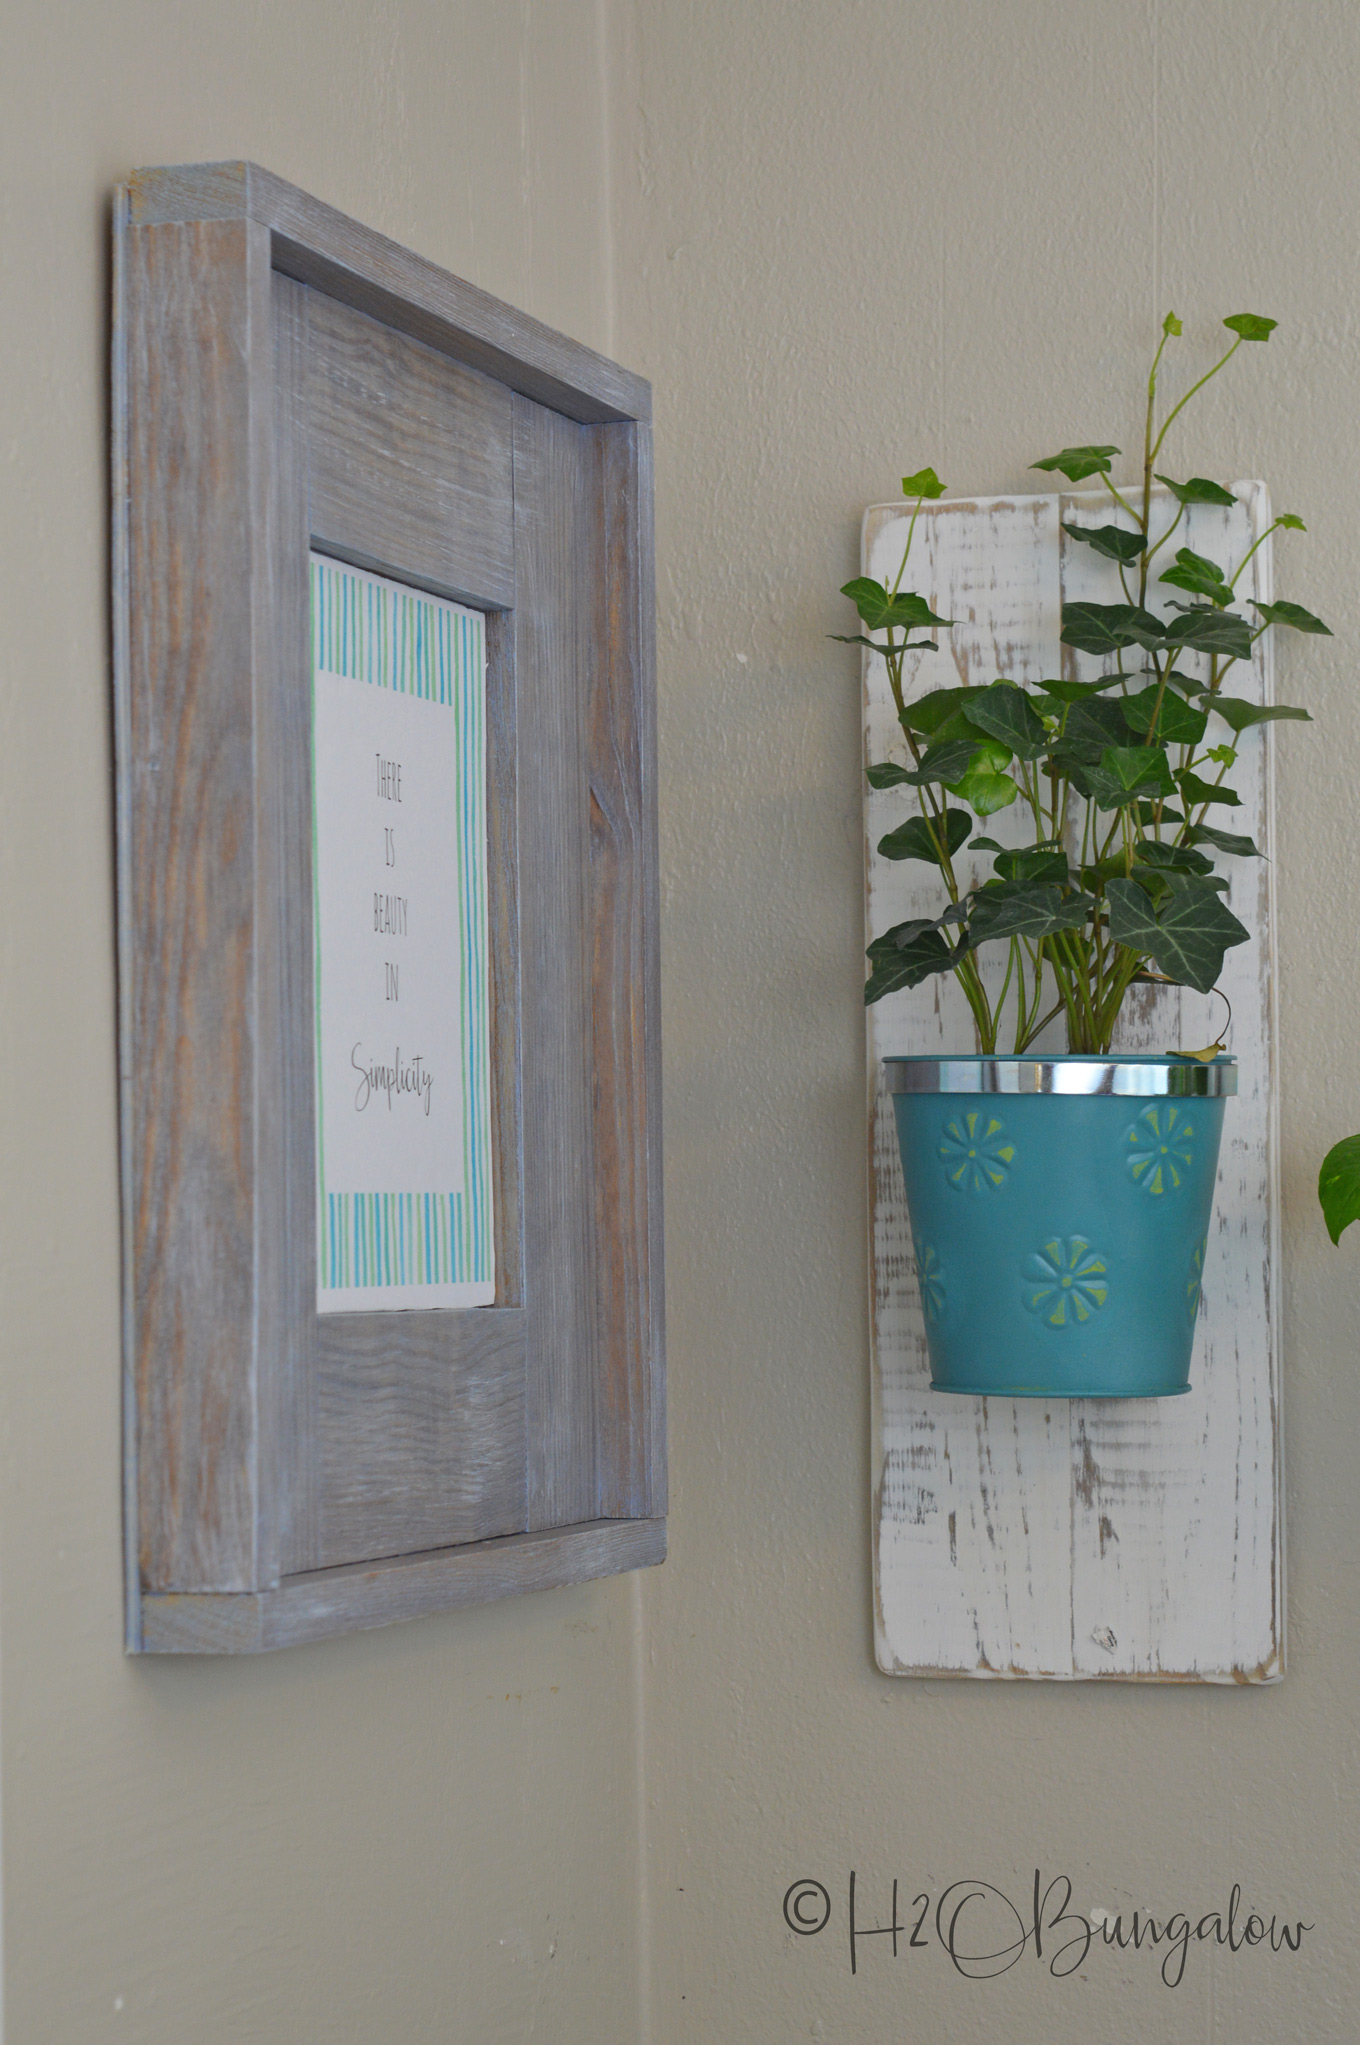 Easy Diy Rustic Picture Frame More, How To Make Your Own Rustic Picture Frames